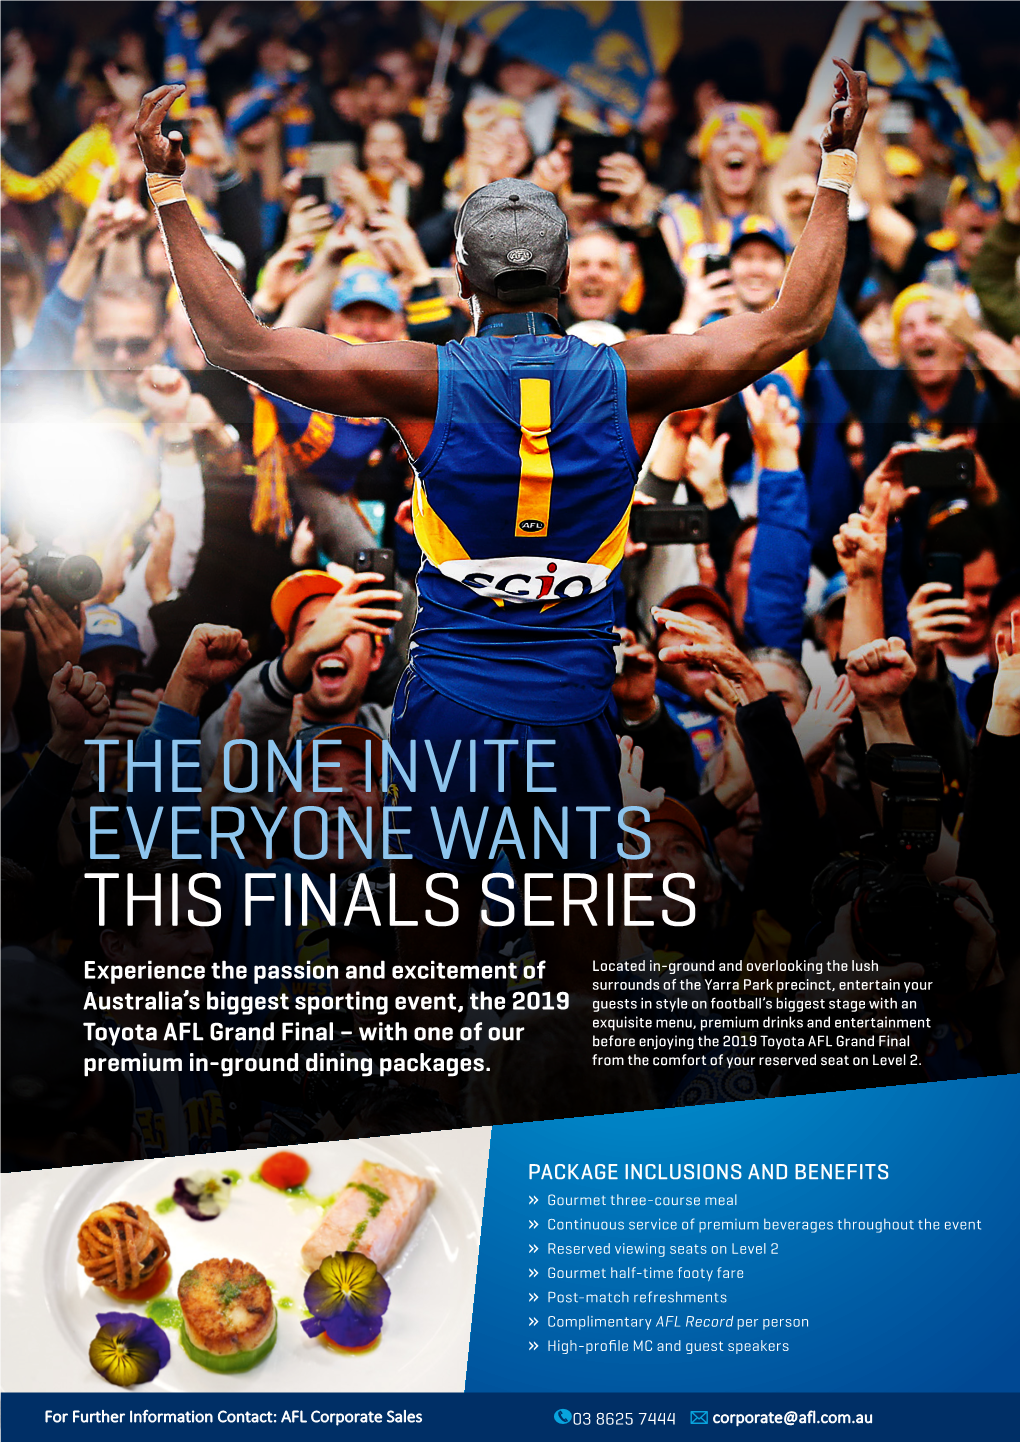 The One Invite Everyone Wants This Finals Series